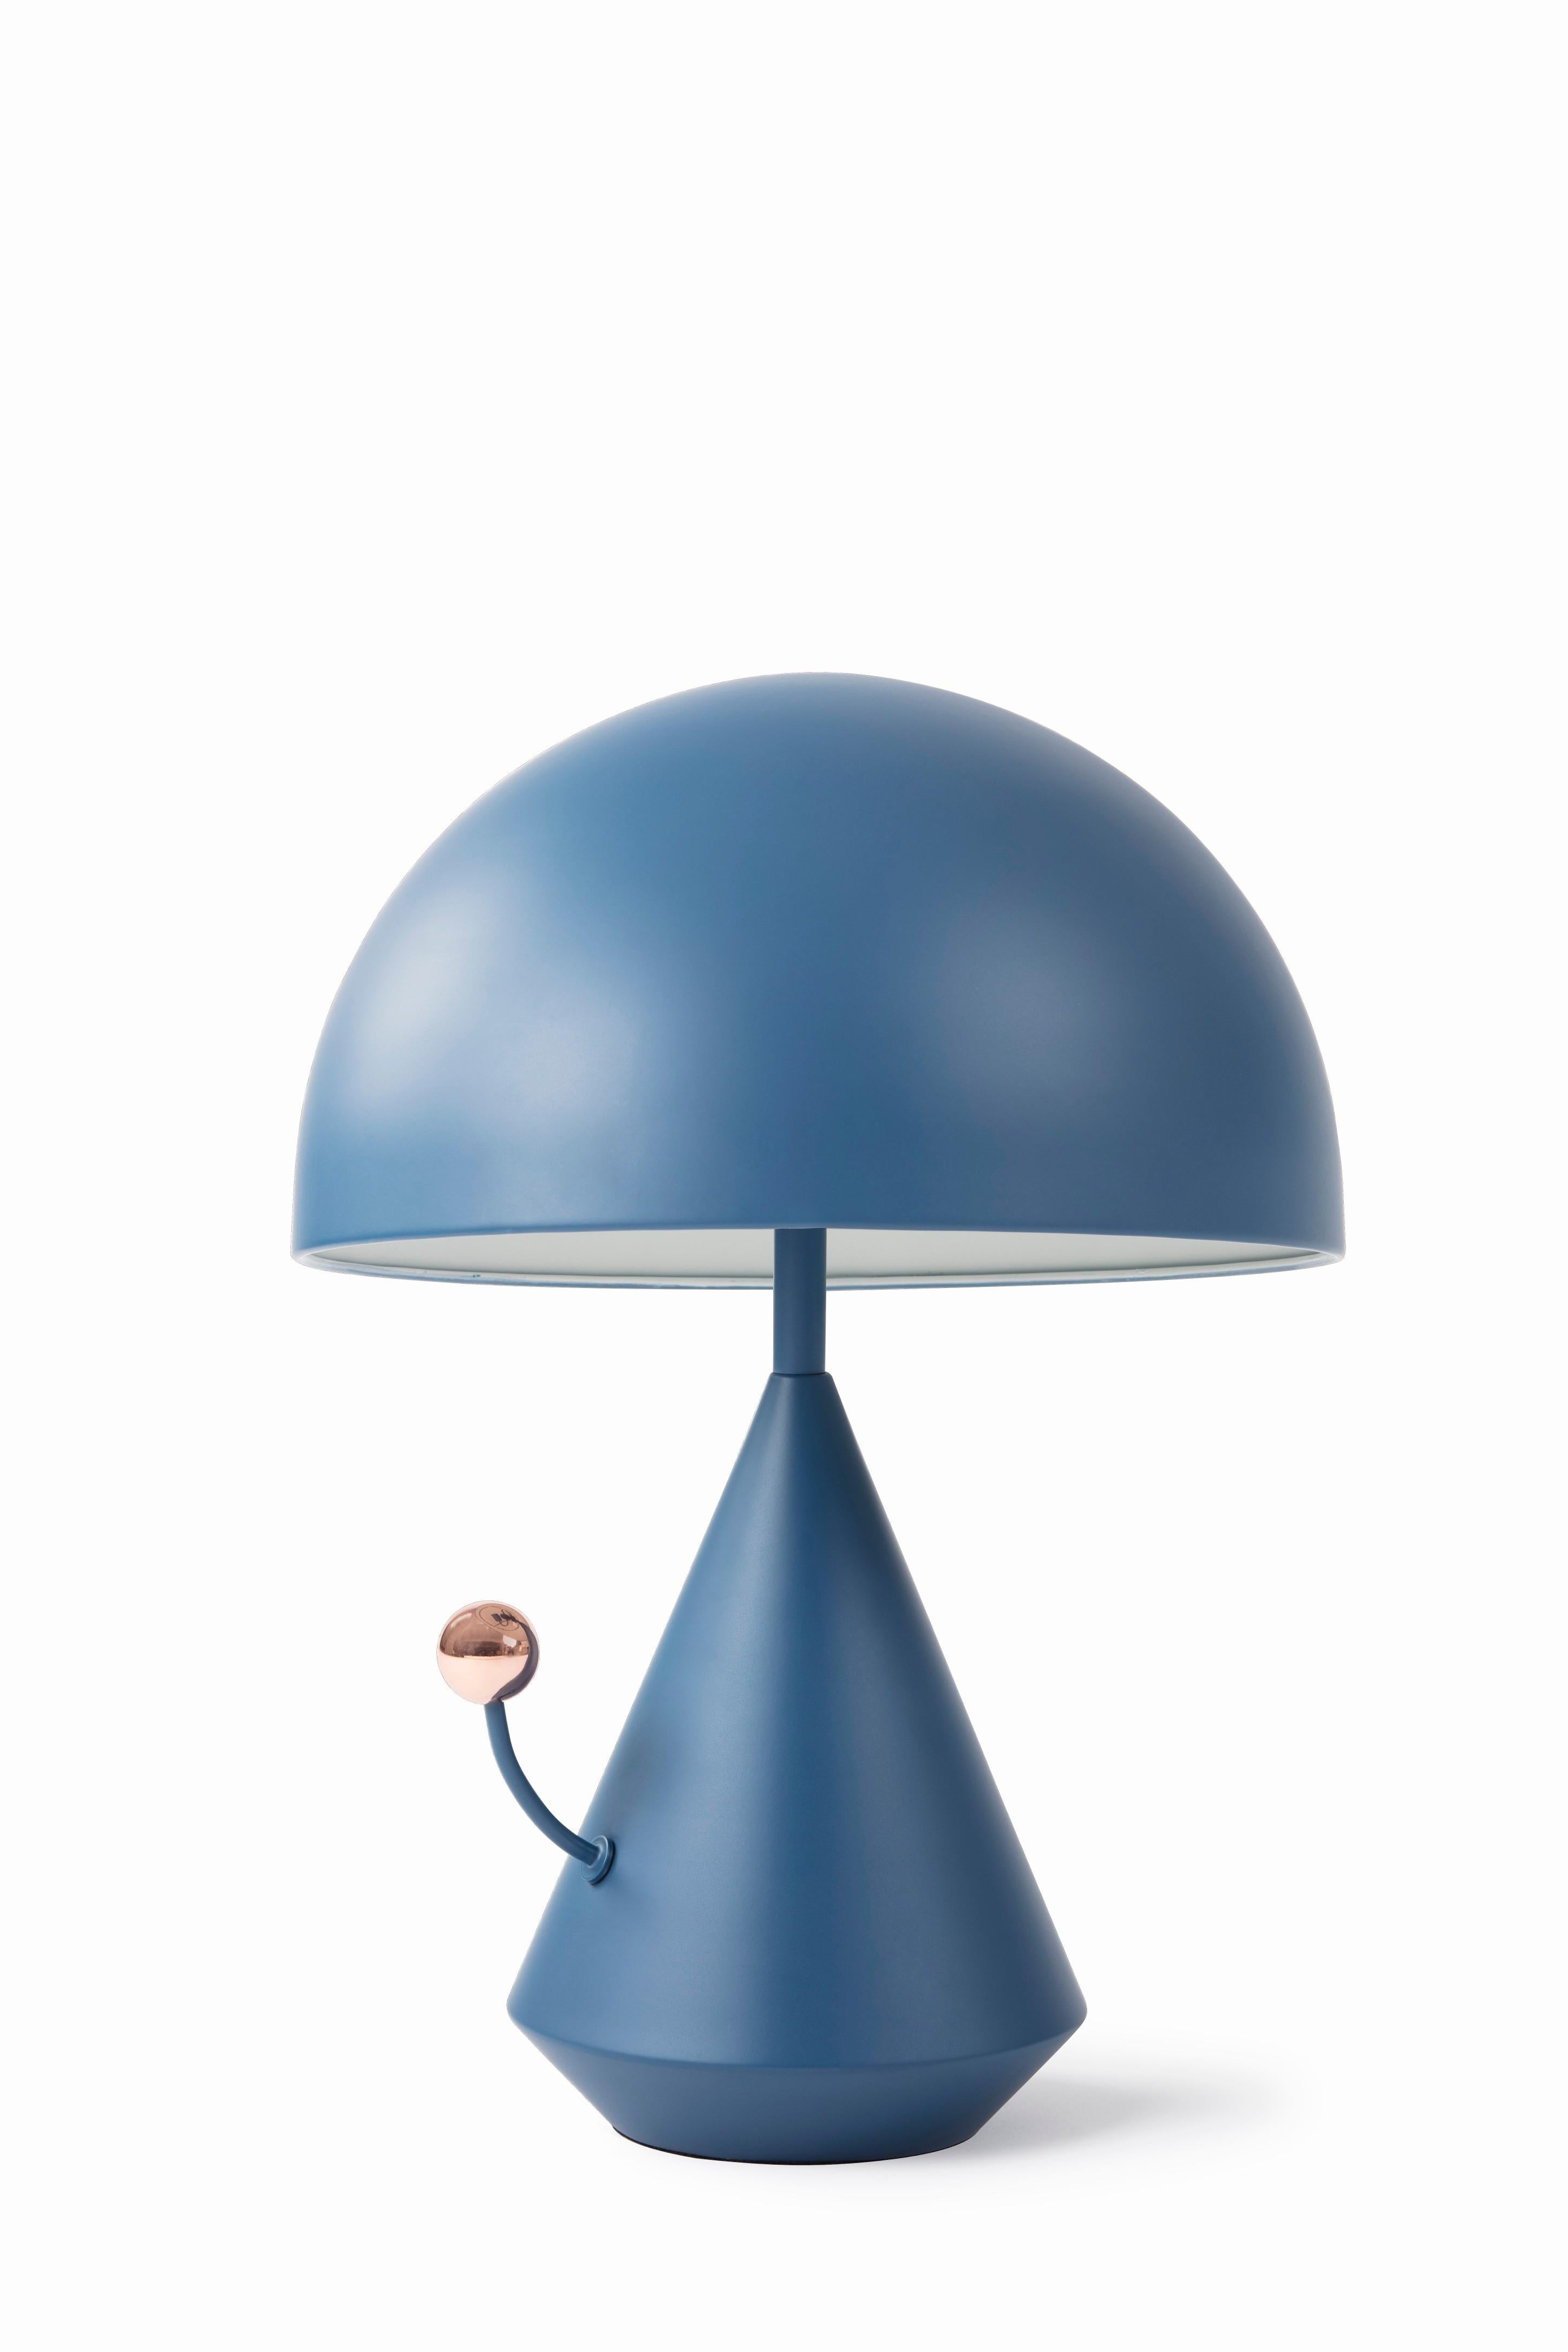 Dali surrealistic table lamp by Thomas Dariel, Maison Dada
Measures: diameter 31.5 x height 43 cm
Tricolored
Powder coated metal shade, base and framework
Touch switch in color finish
220V – 240V 50Hz E27 max. 60W
Available in 3 color